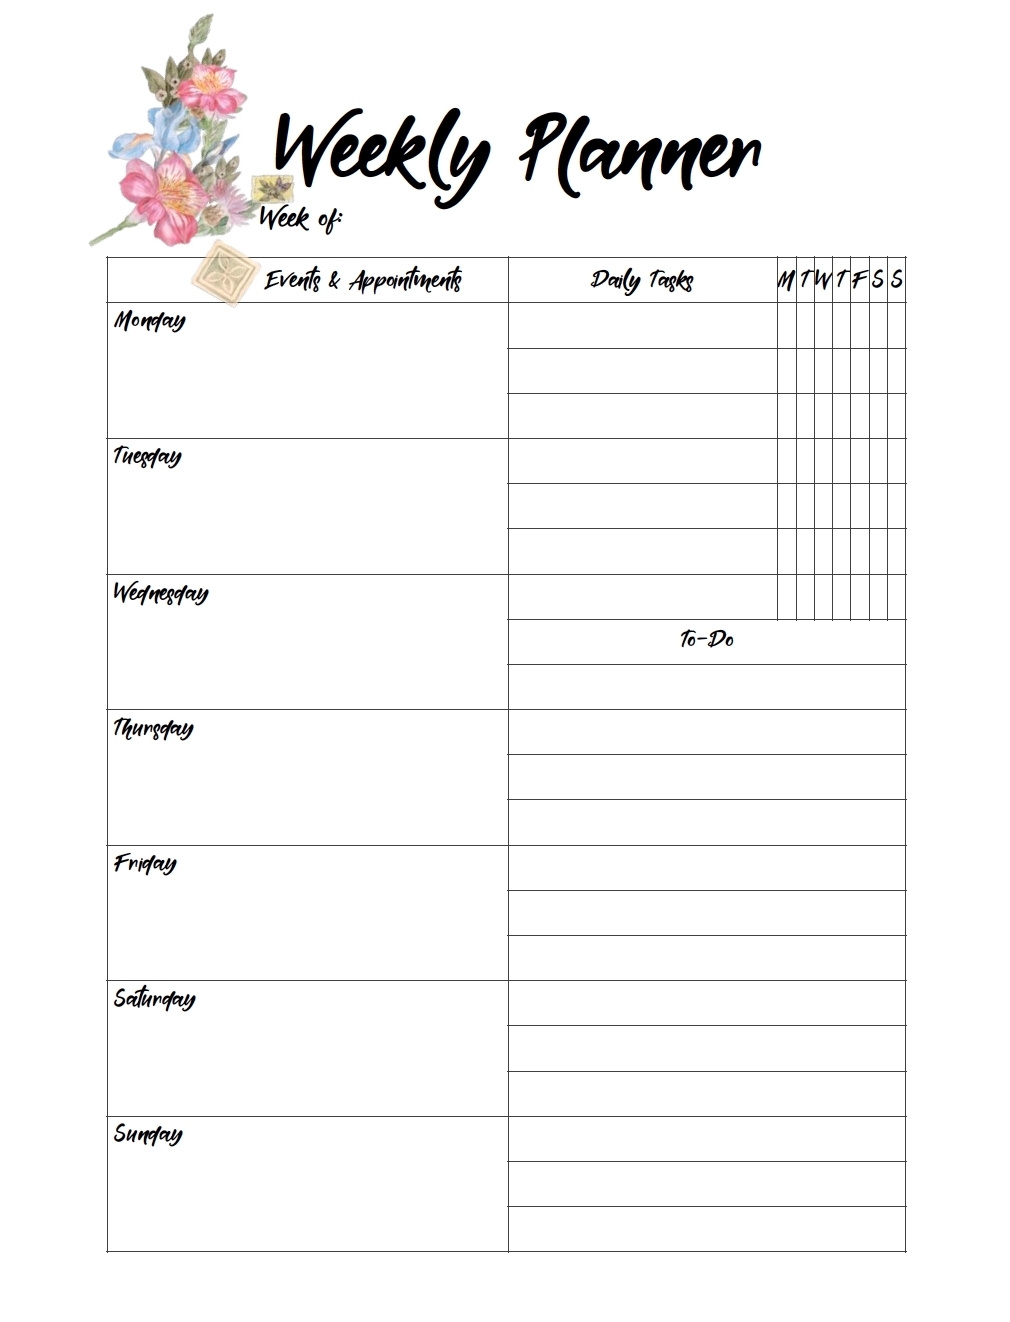 Catch Printable Blank Monday Through Friday Weekly